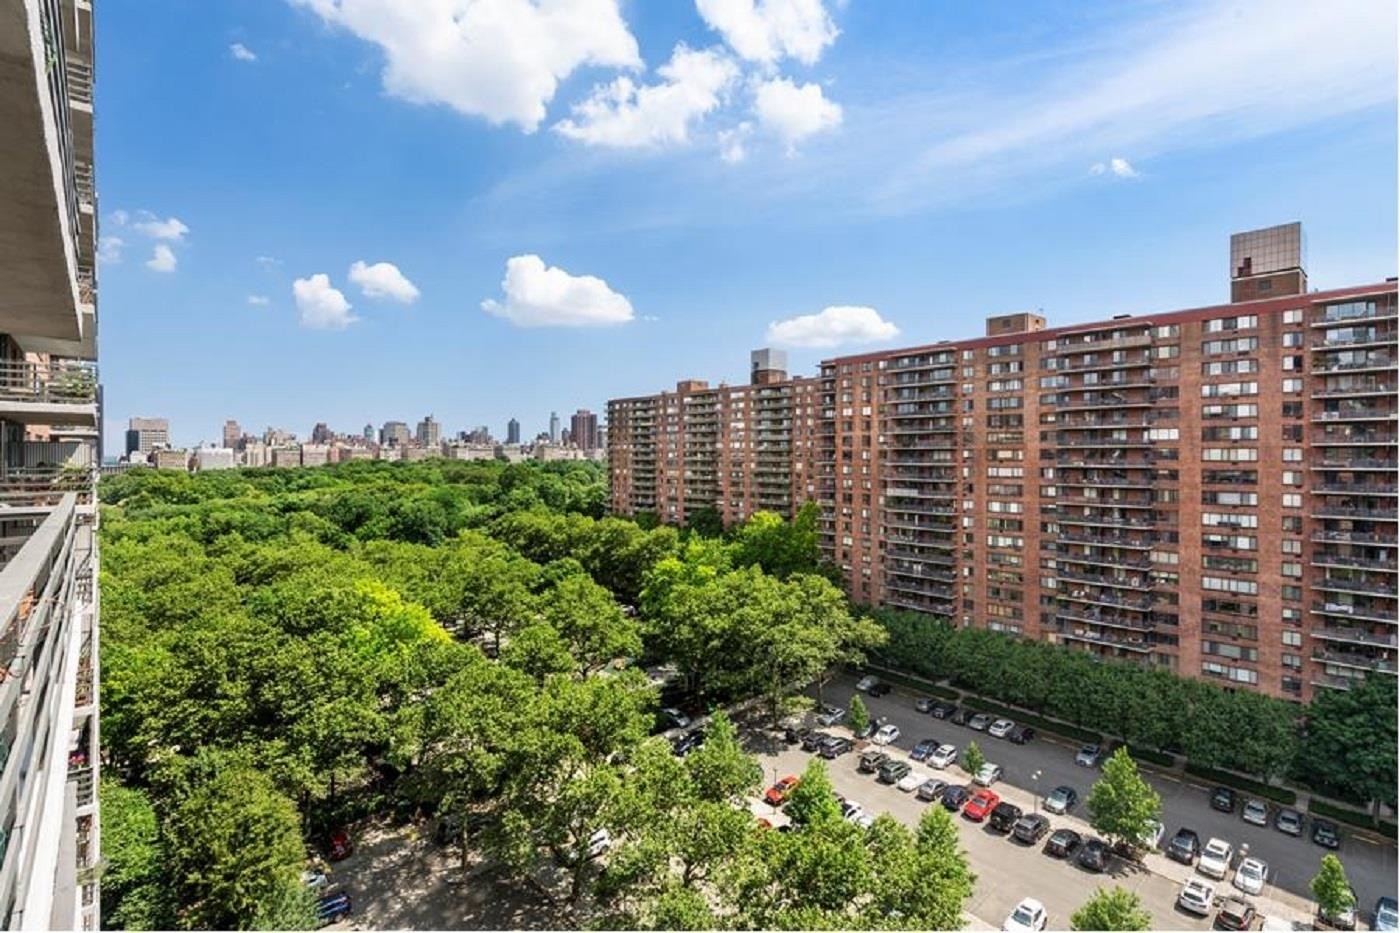 Condominium for Sale at Cpw Towers, 392 CENTRAL PARK W, 8Y Manhattan Valley, New York, NY 10025